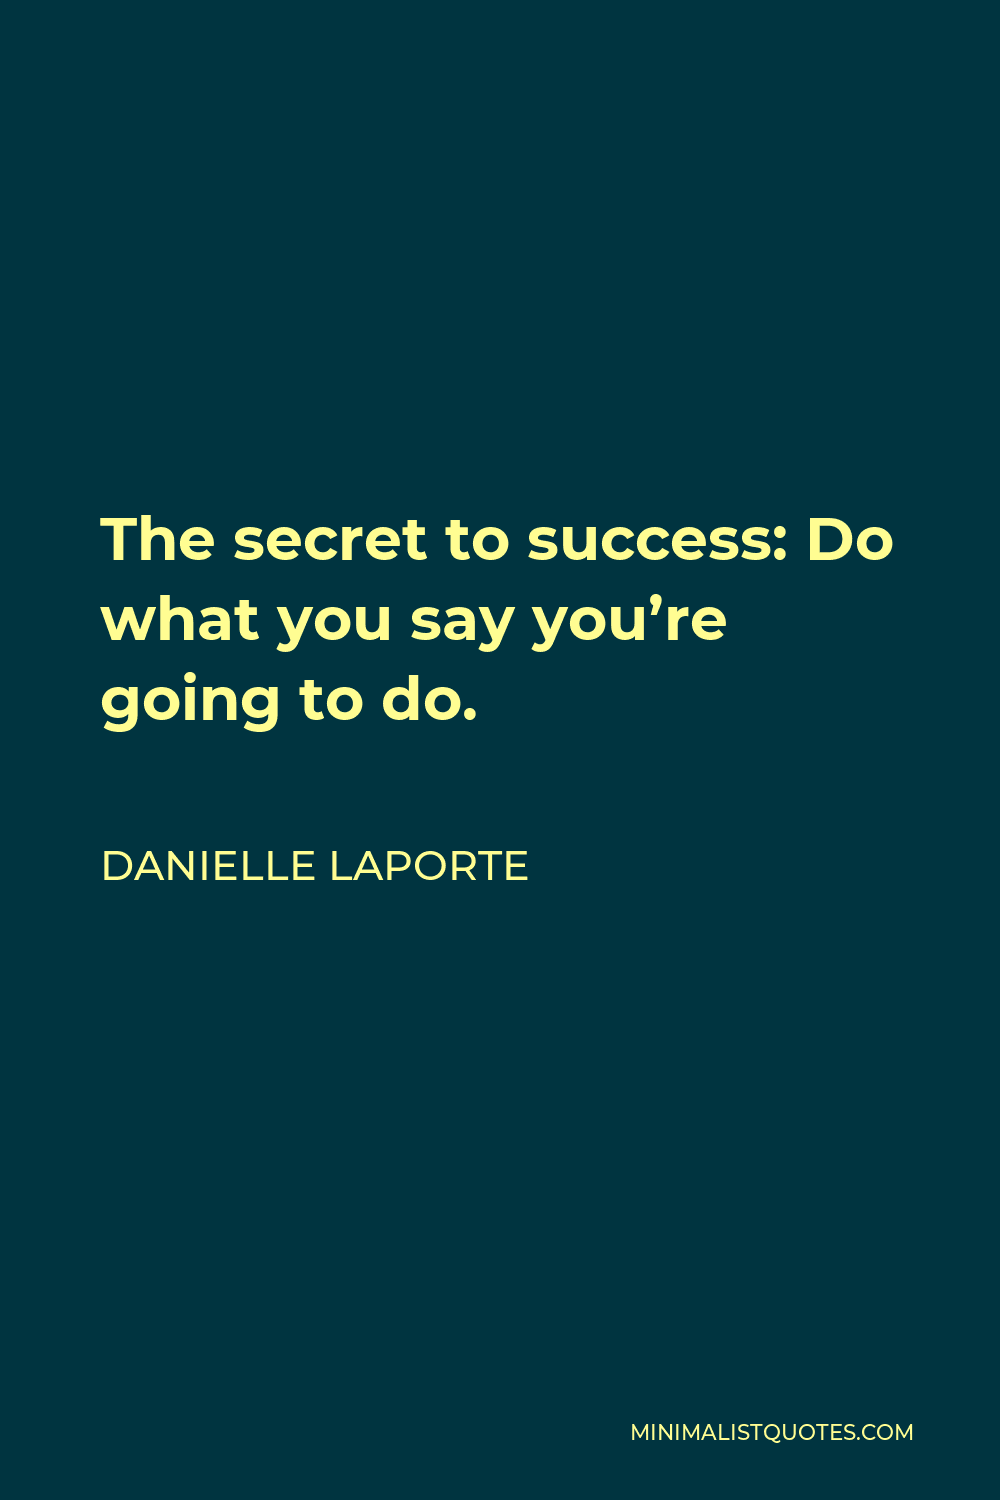 Danielle LaPorte Quote - The secret to success: Do what you say you’re going to do.